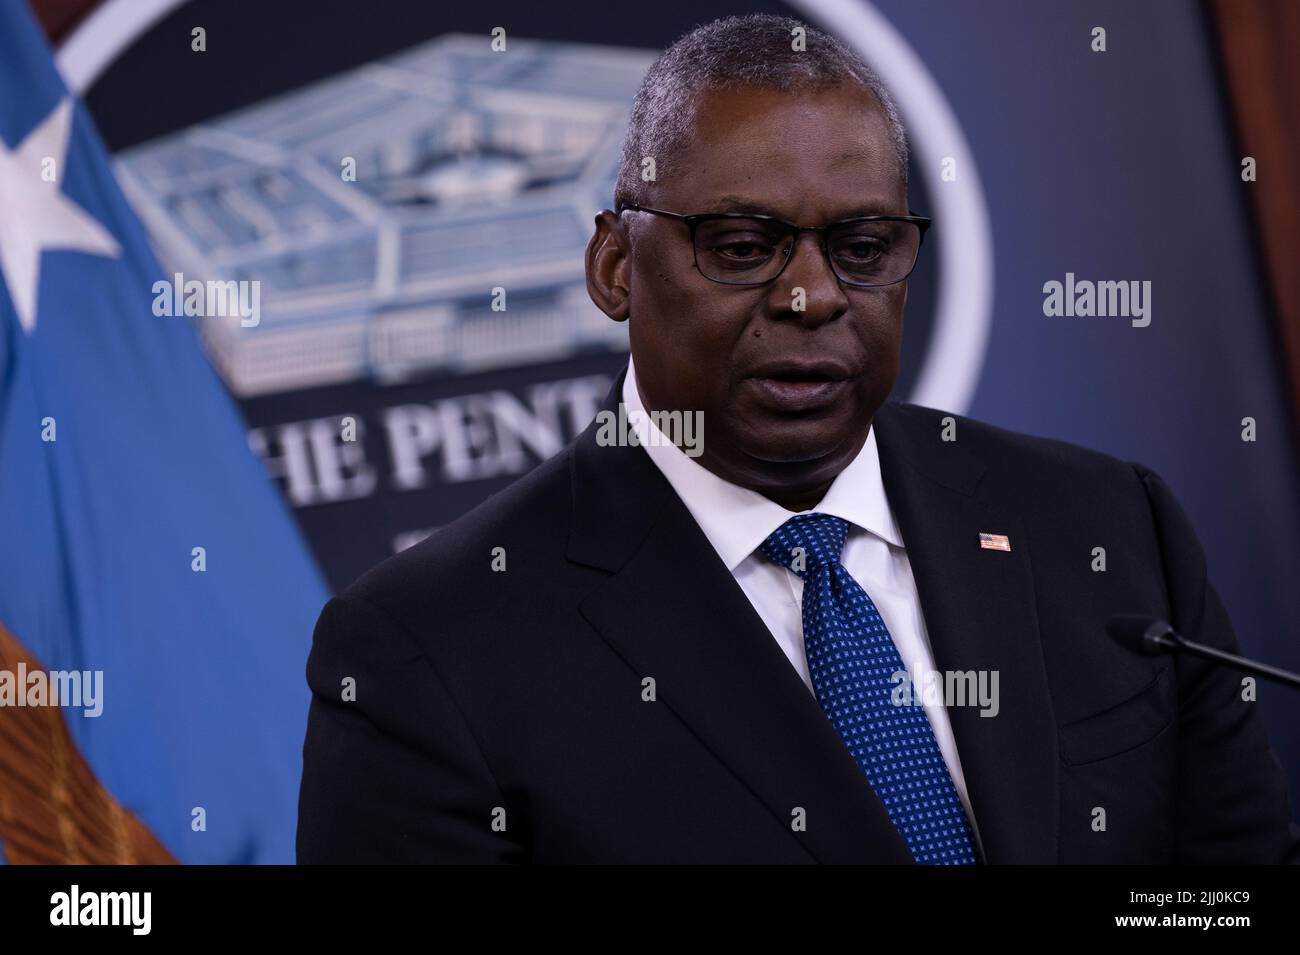 Arlington, United States Of America. 20th July, 2022. Arlington, United States of America. 20 July, 2022. U.S. Secretary of Defense Lloyd Austin, responds to a question during a press conference at the Pentagon, July 20, 2022 in Arlington, Virginia. Credit: Chad J. McNeeley/DOD/Alamy Live News Stock Photo